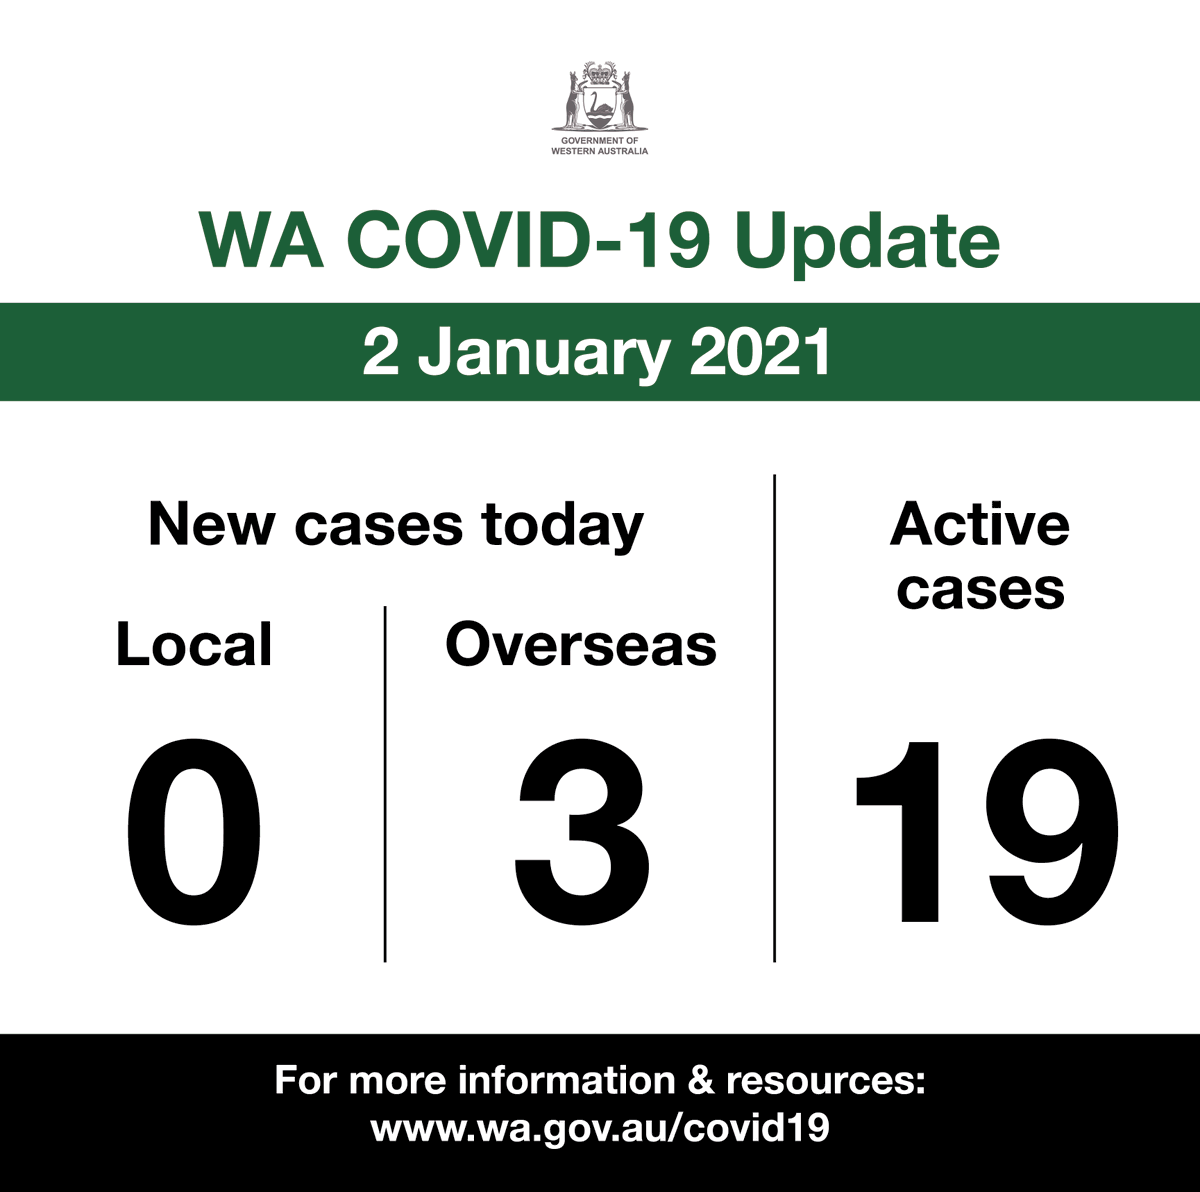 Mark Mcgowan On Twitter This Is Our Wa Covid 19 Update For Saturday 2 January 2021 For Official Information On Covid 19 In Western Australia Visit Https T Co Rf5avd4ryp Https T Co Dcvvwfqcph Https T Co Pzlh3sf9la